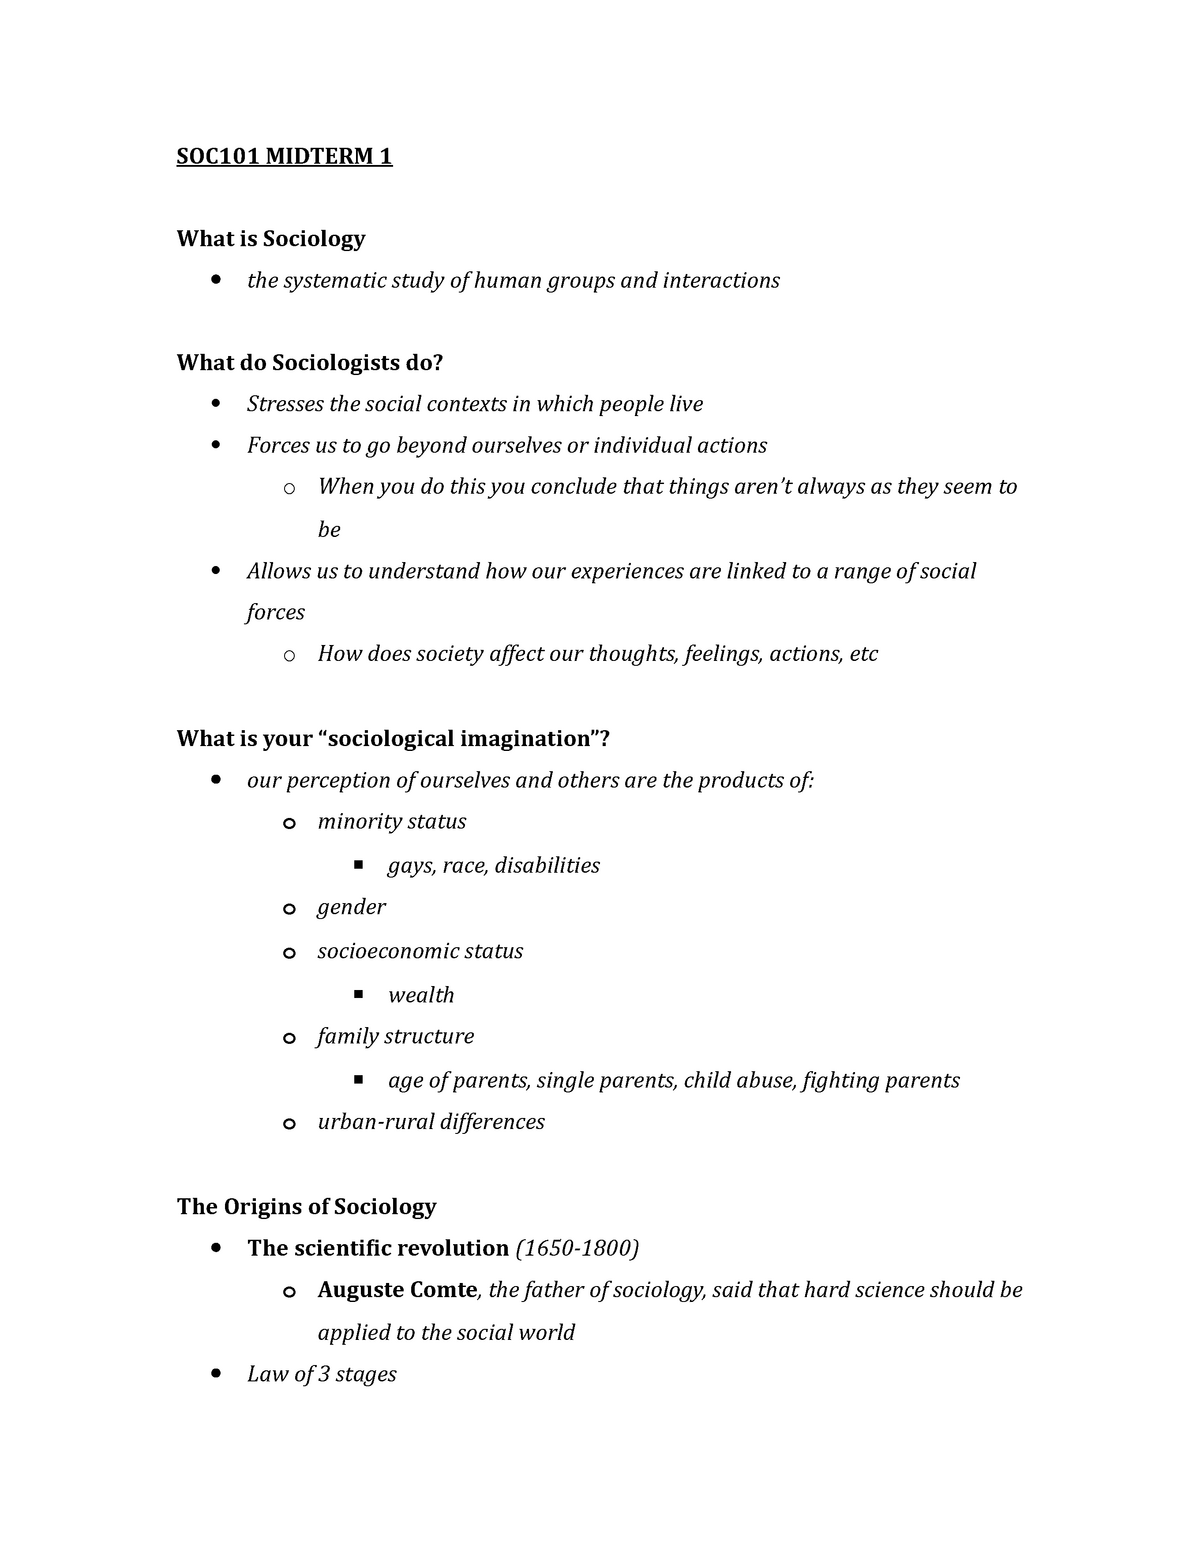 research methods exam questions sociology